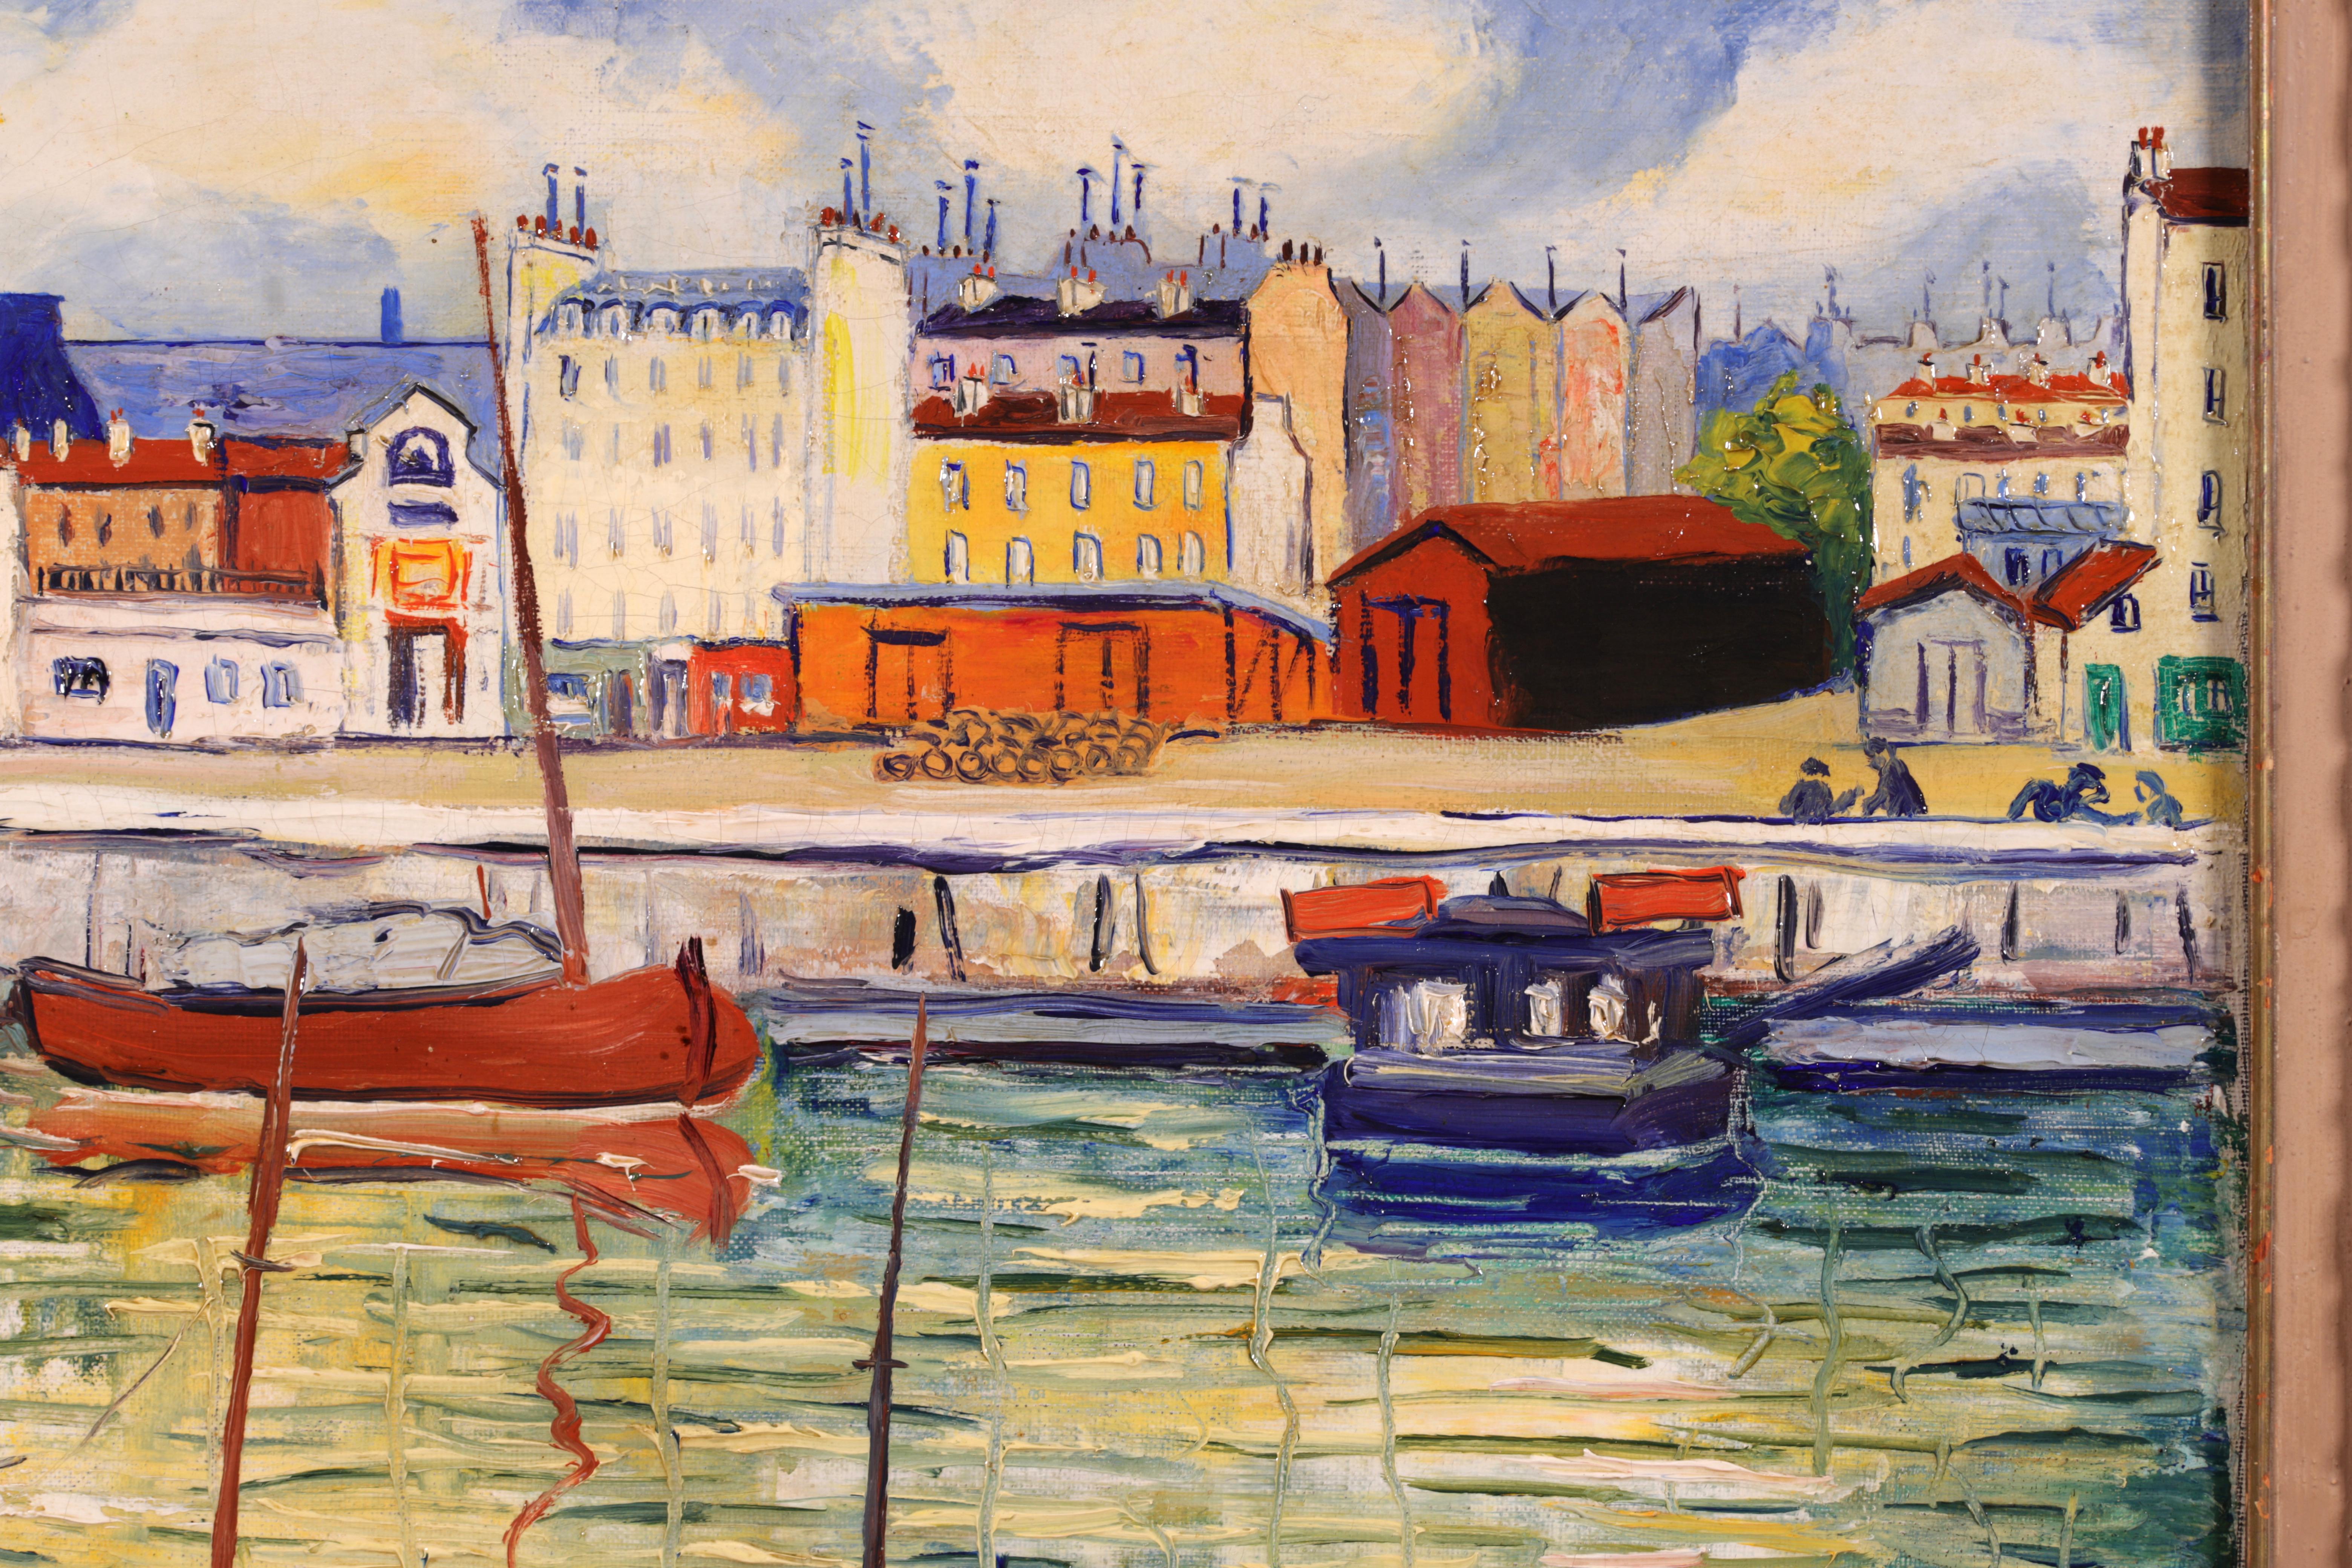 Signed post-impressionist river cityscape oil on board by French painter Elisee Maclet. The work depicts a view of the port at Honfleur, Normandy on the River Seine Estuary. Rows of colourful boats are moored at the port and the characterful